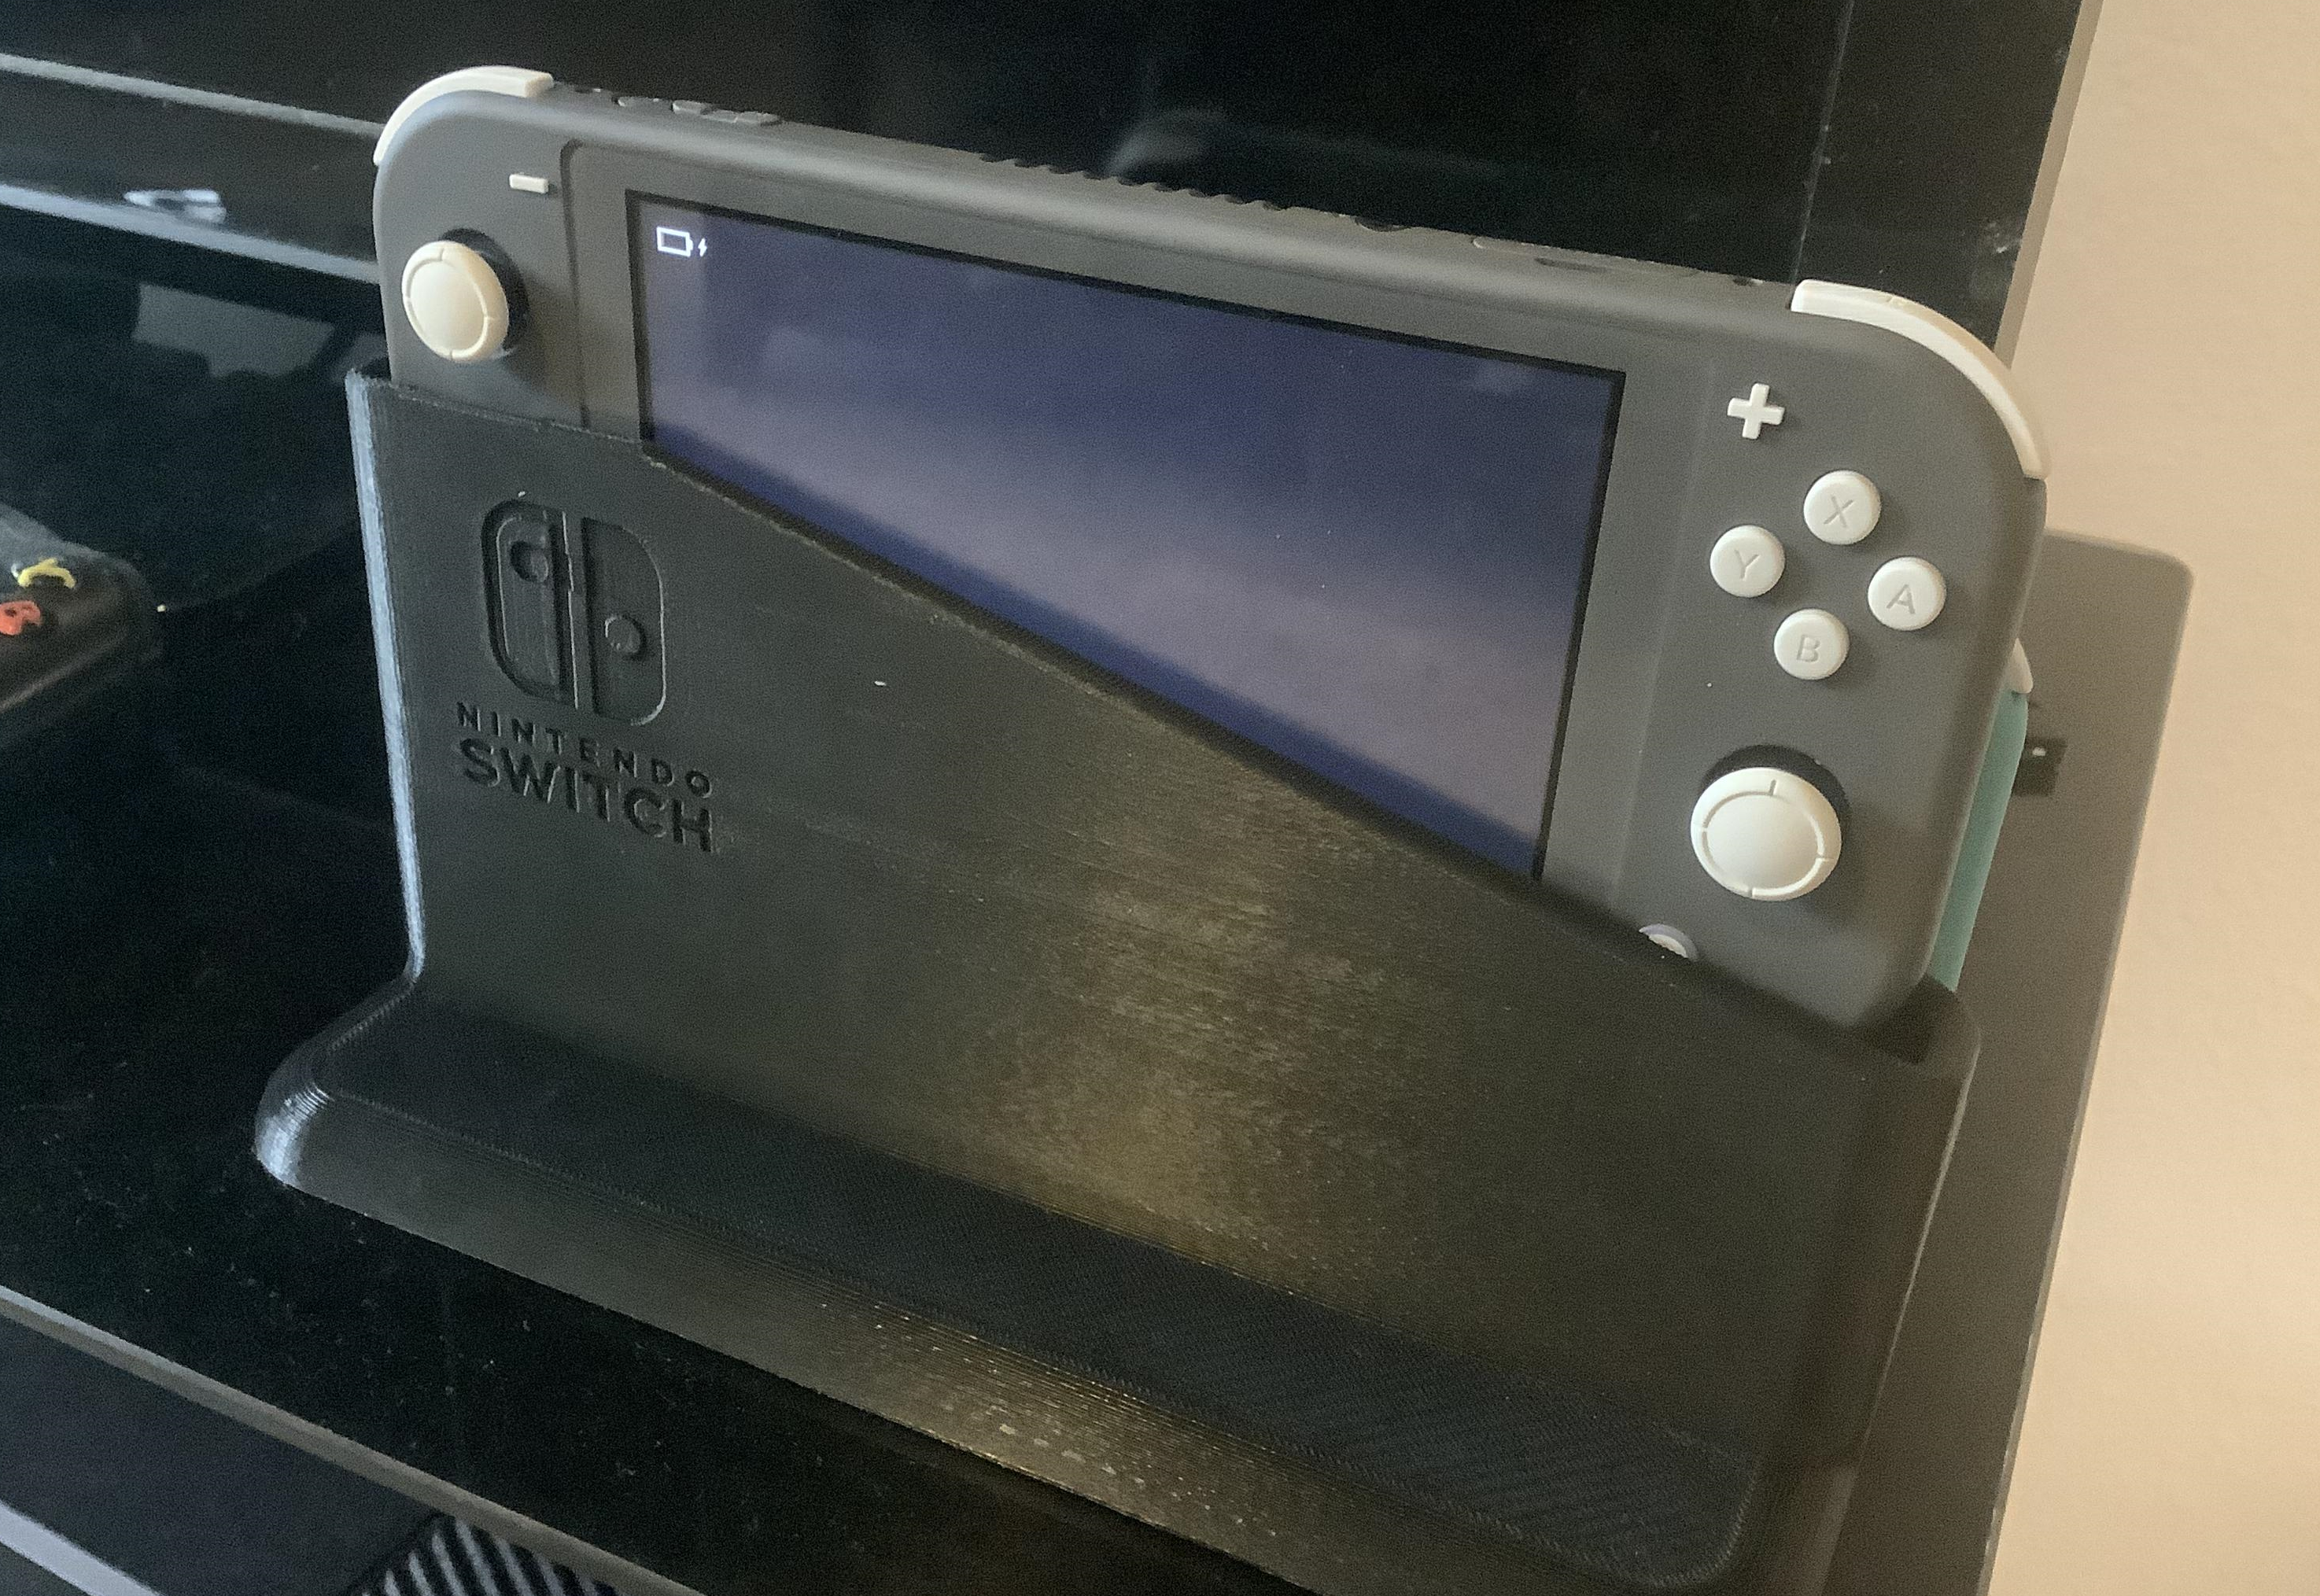 can a switch lite connect to a tv